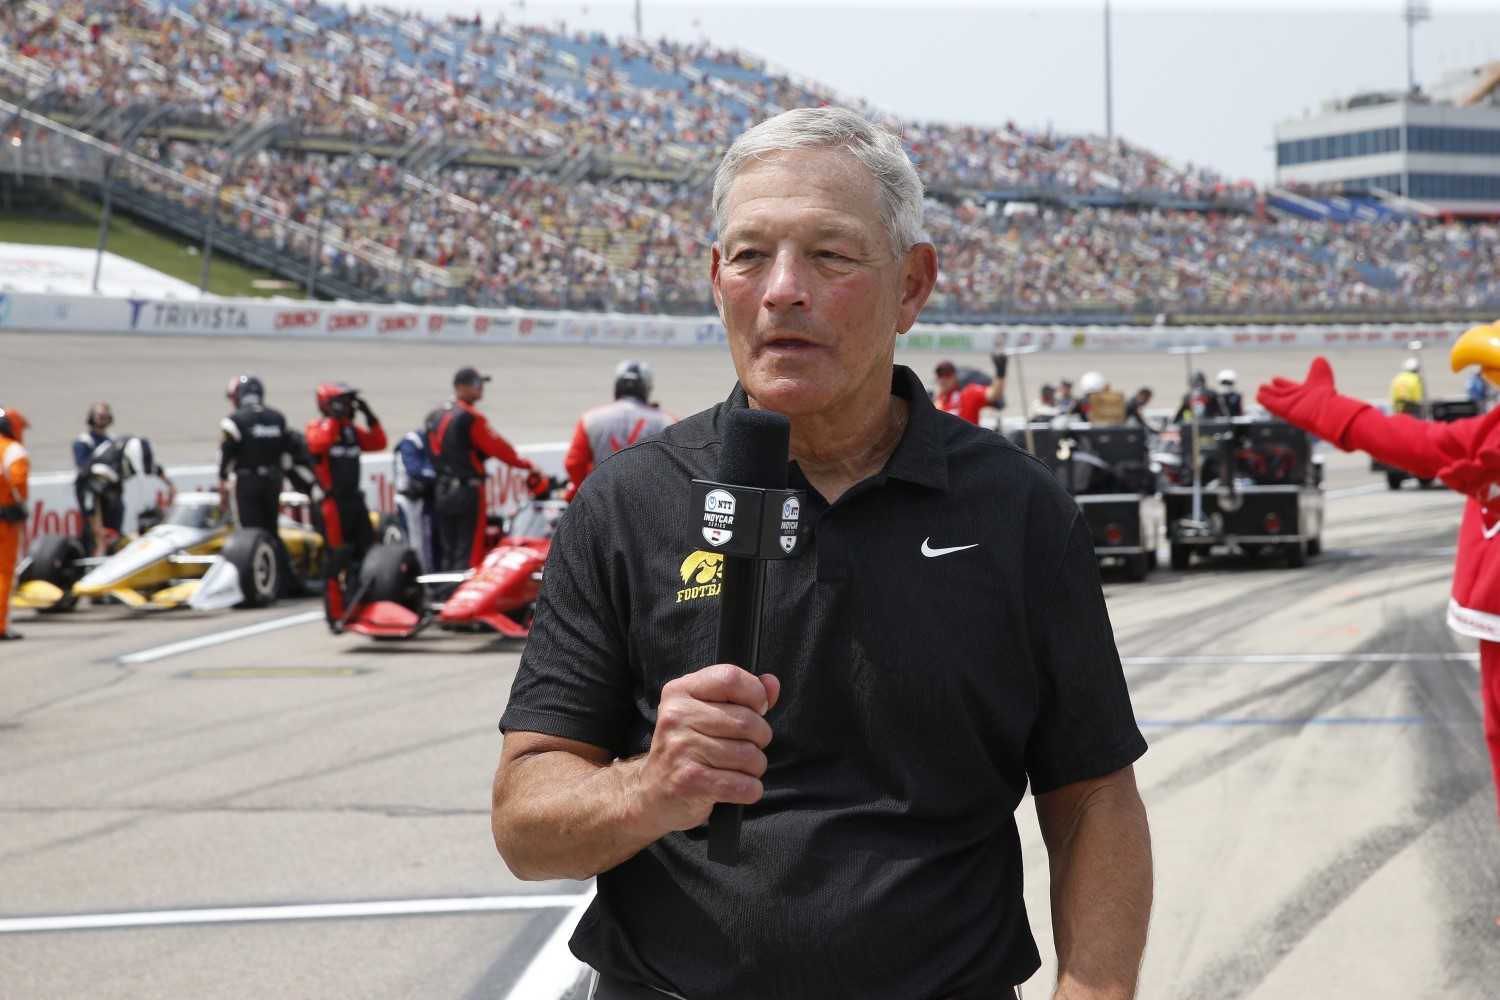 Kirk Ferentz - gives the command to start engines for the Hy-Vee One Step 250 Presented by Gatorade - By_ Chris Jones. The massive empty seats do not lie. More People came later to see the concerts.